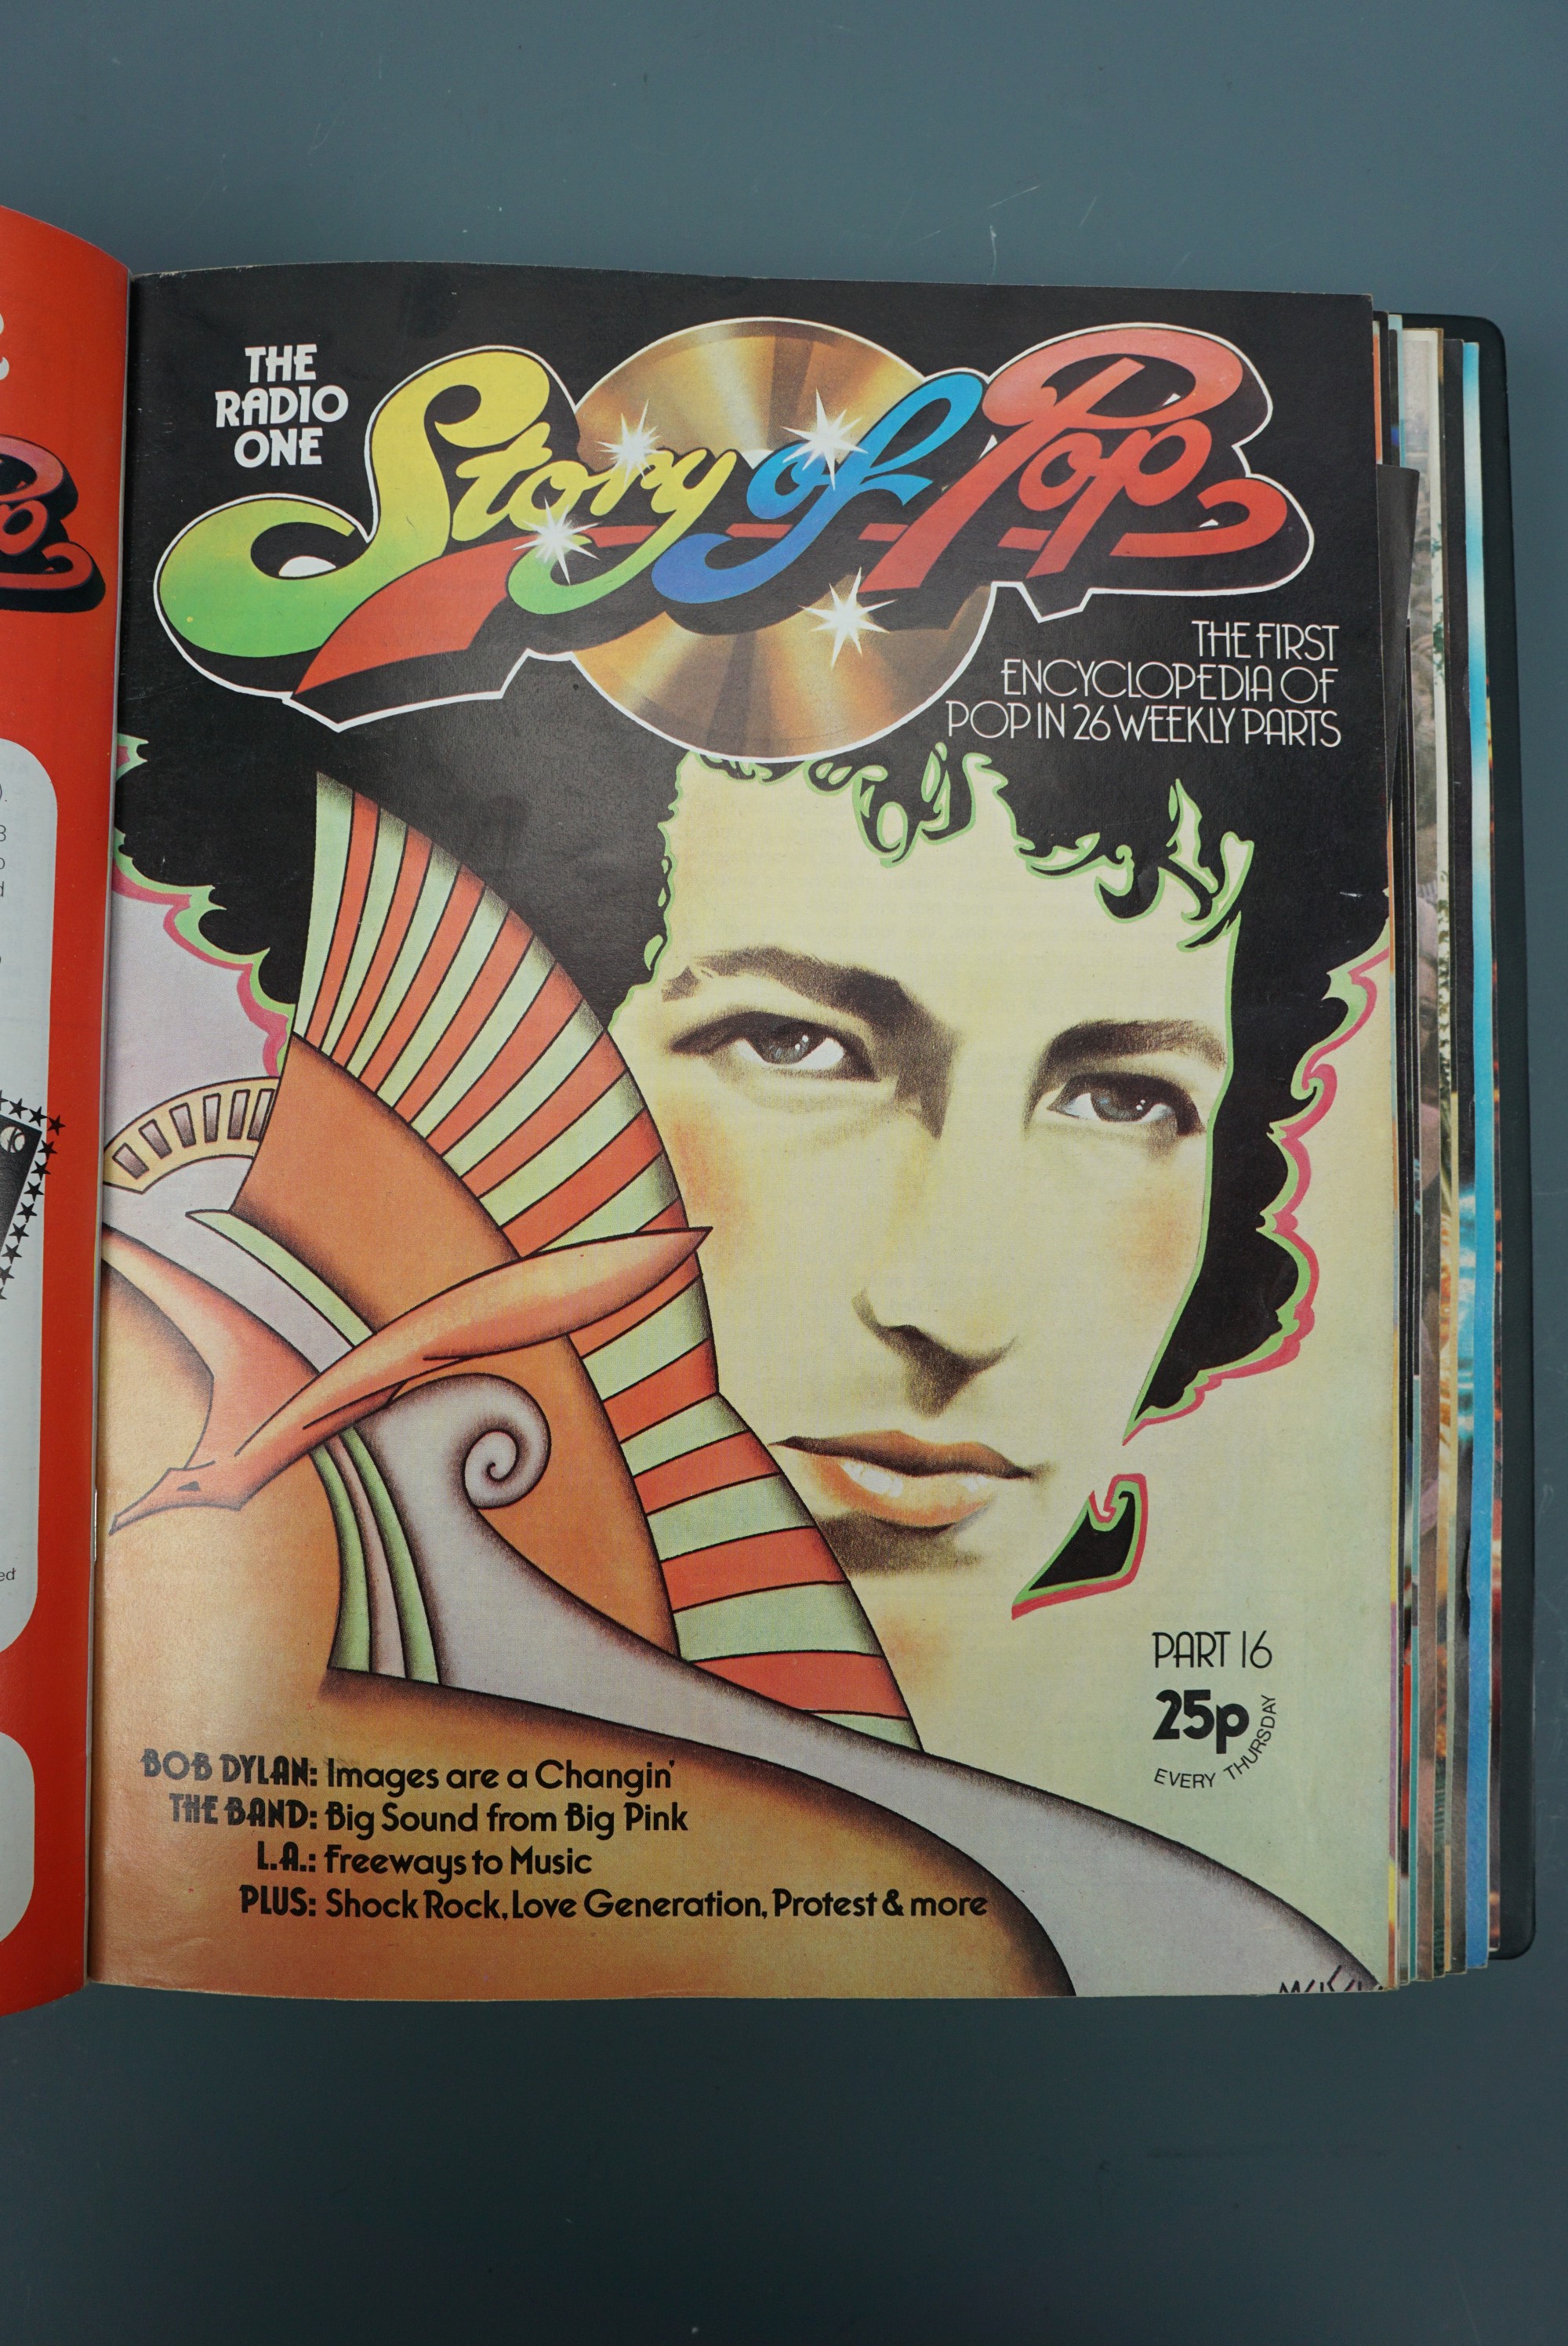 A set of the 1973 Radio One magazine "The Story Of Pop" in original binders - Image 3 of 4